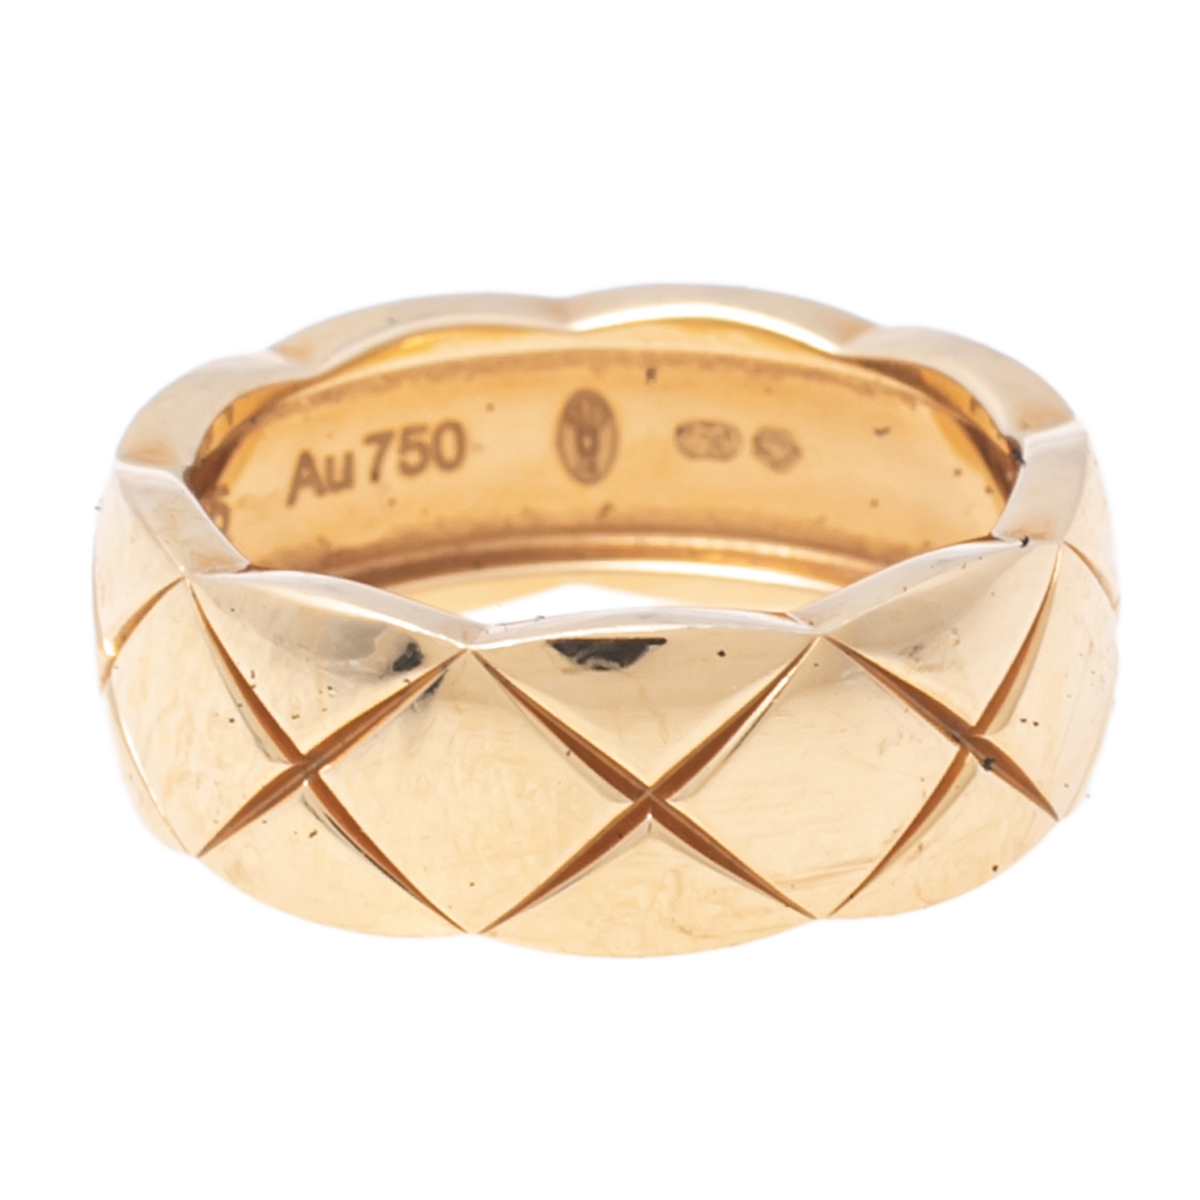 

Chanel Coco Crush Quilted Motif Small Version 18K Yellow Gold Band Ring Size